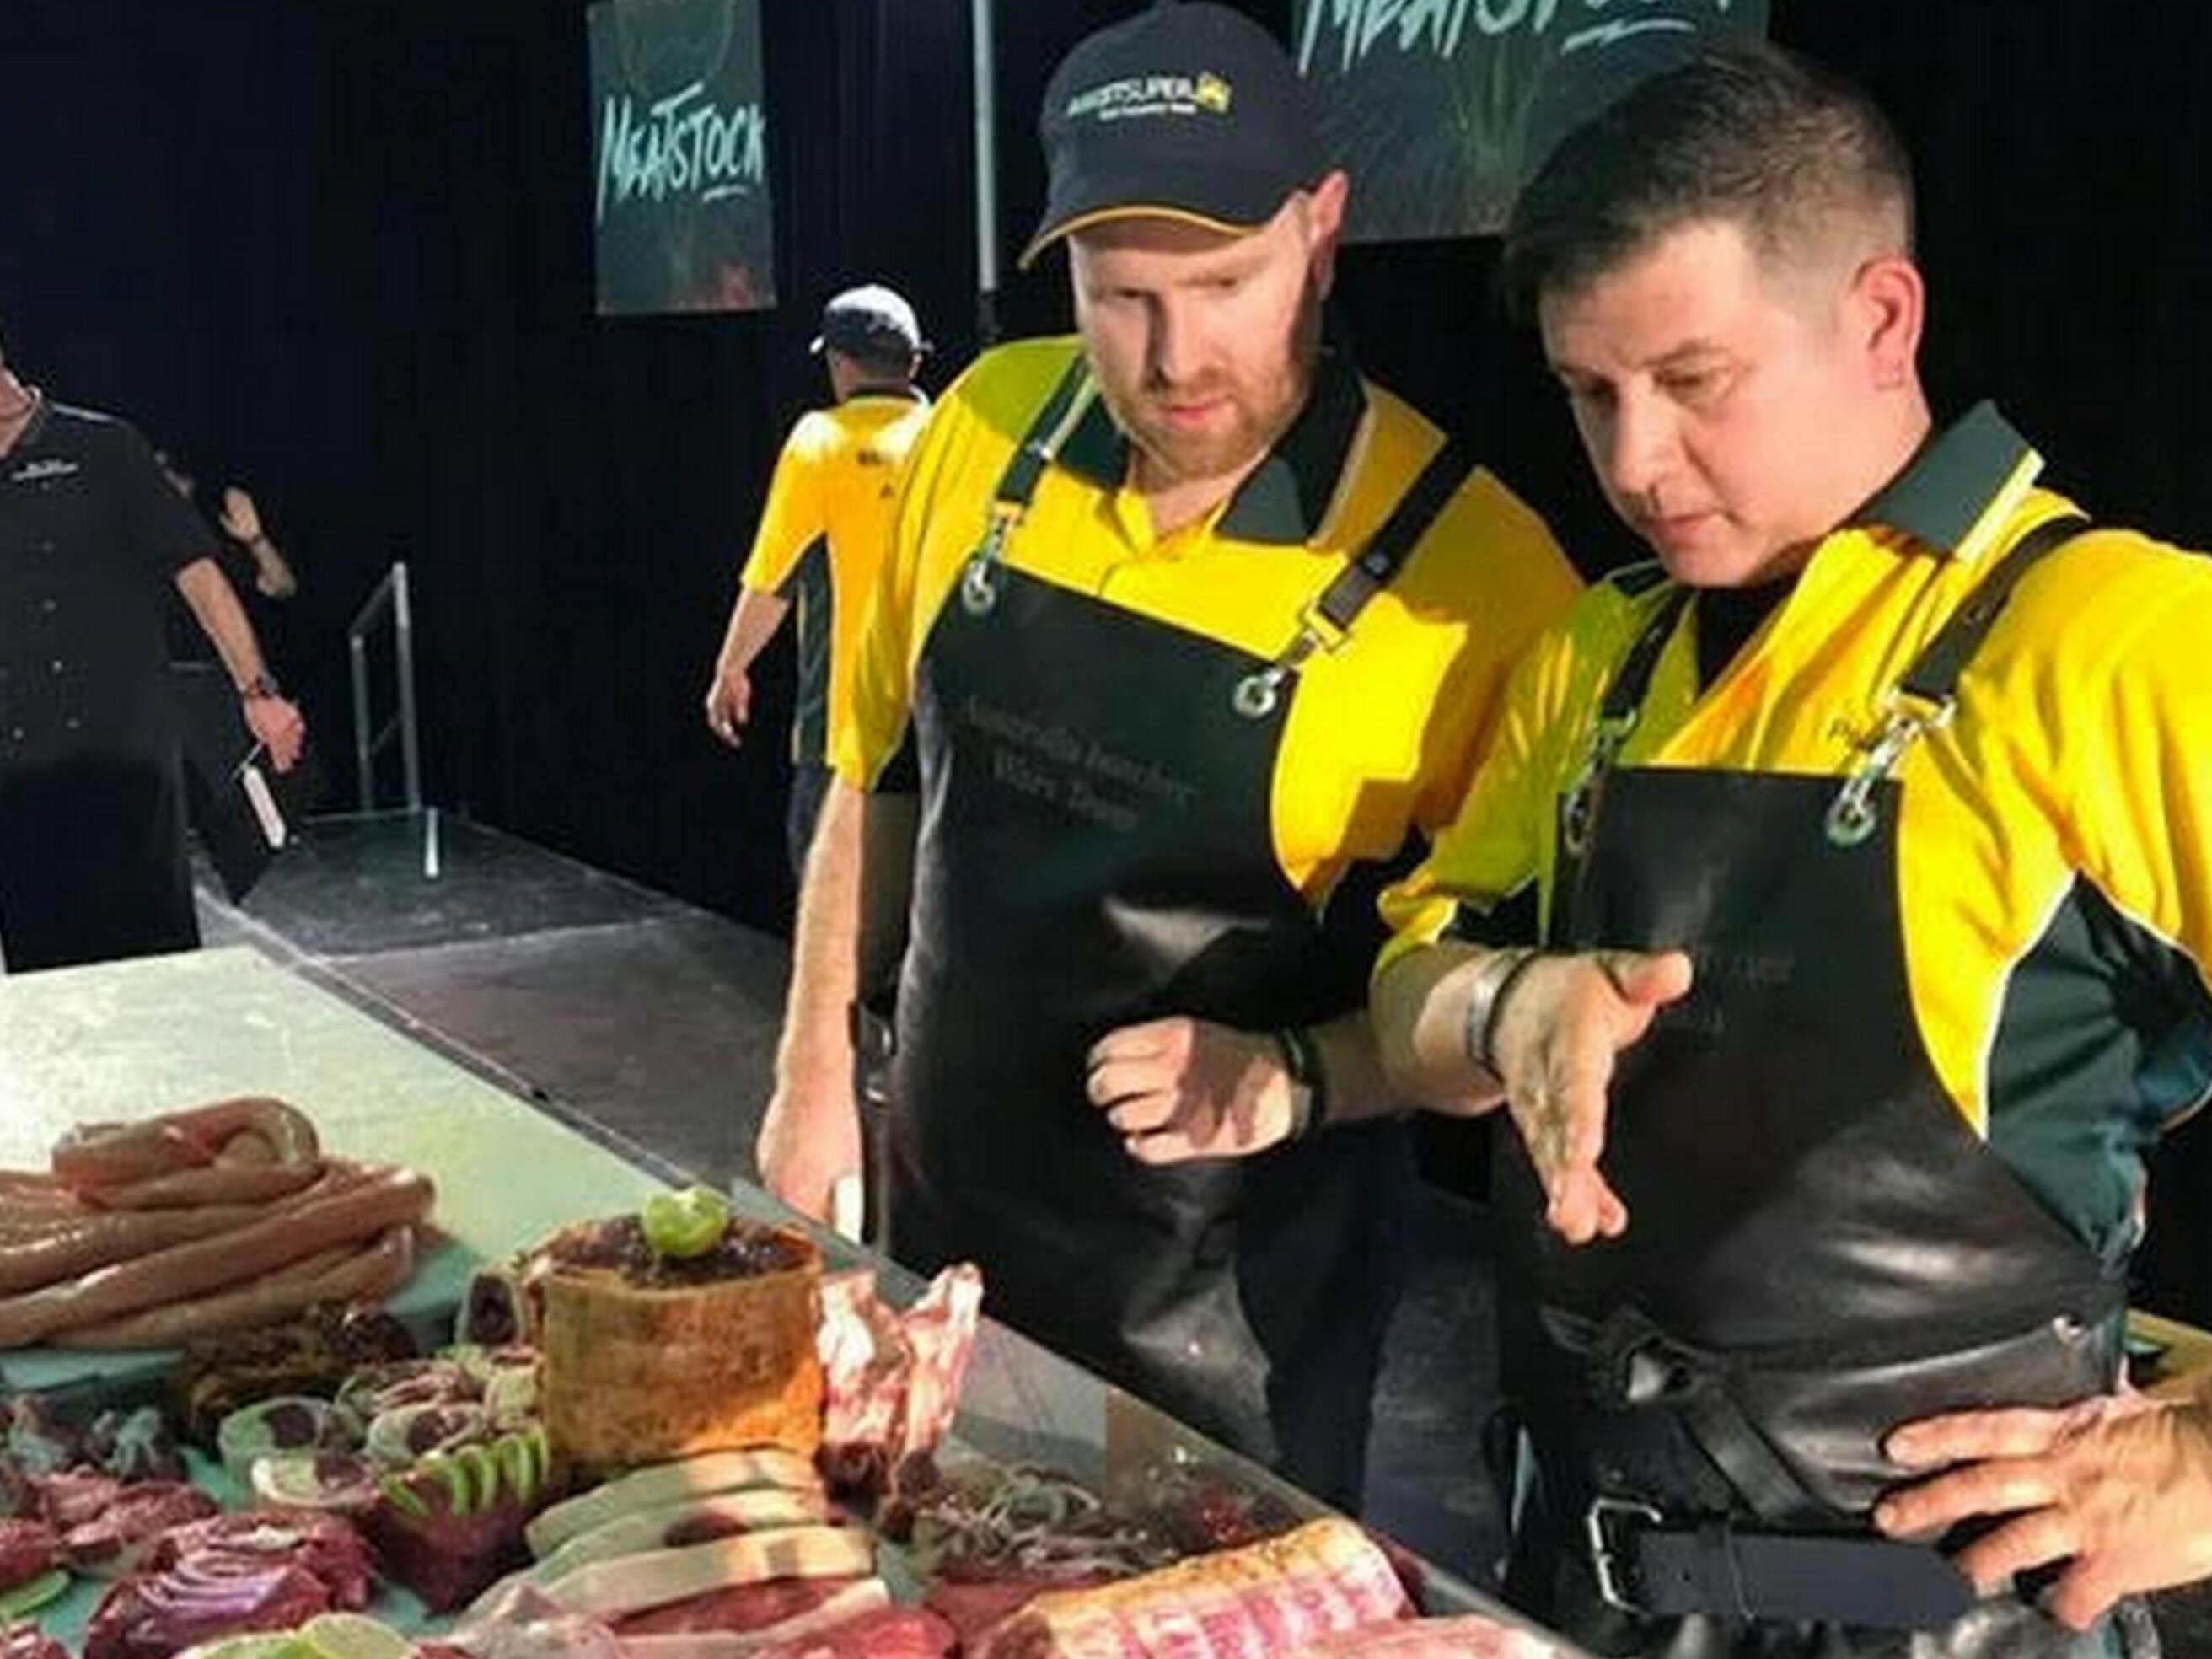 Completely different: Sydney butcher in legal stoush with Grill'd